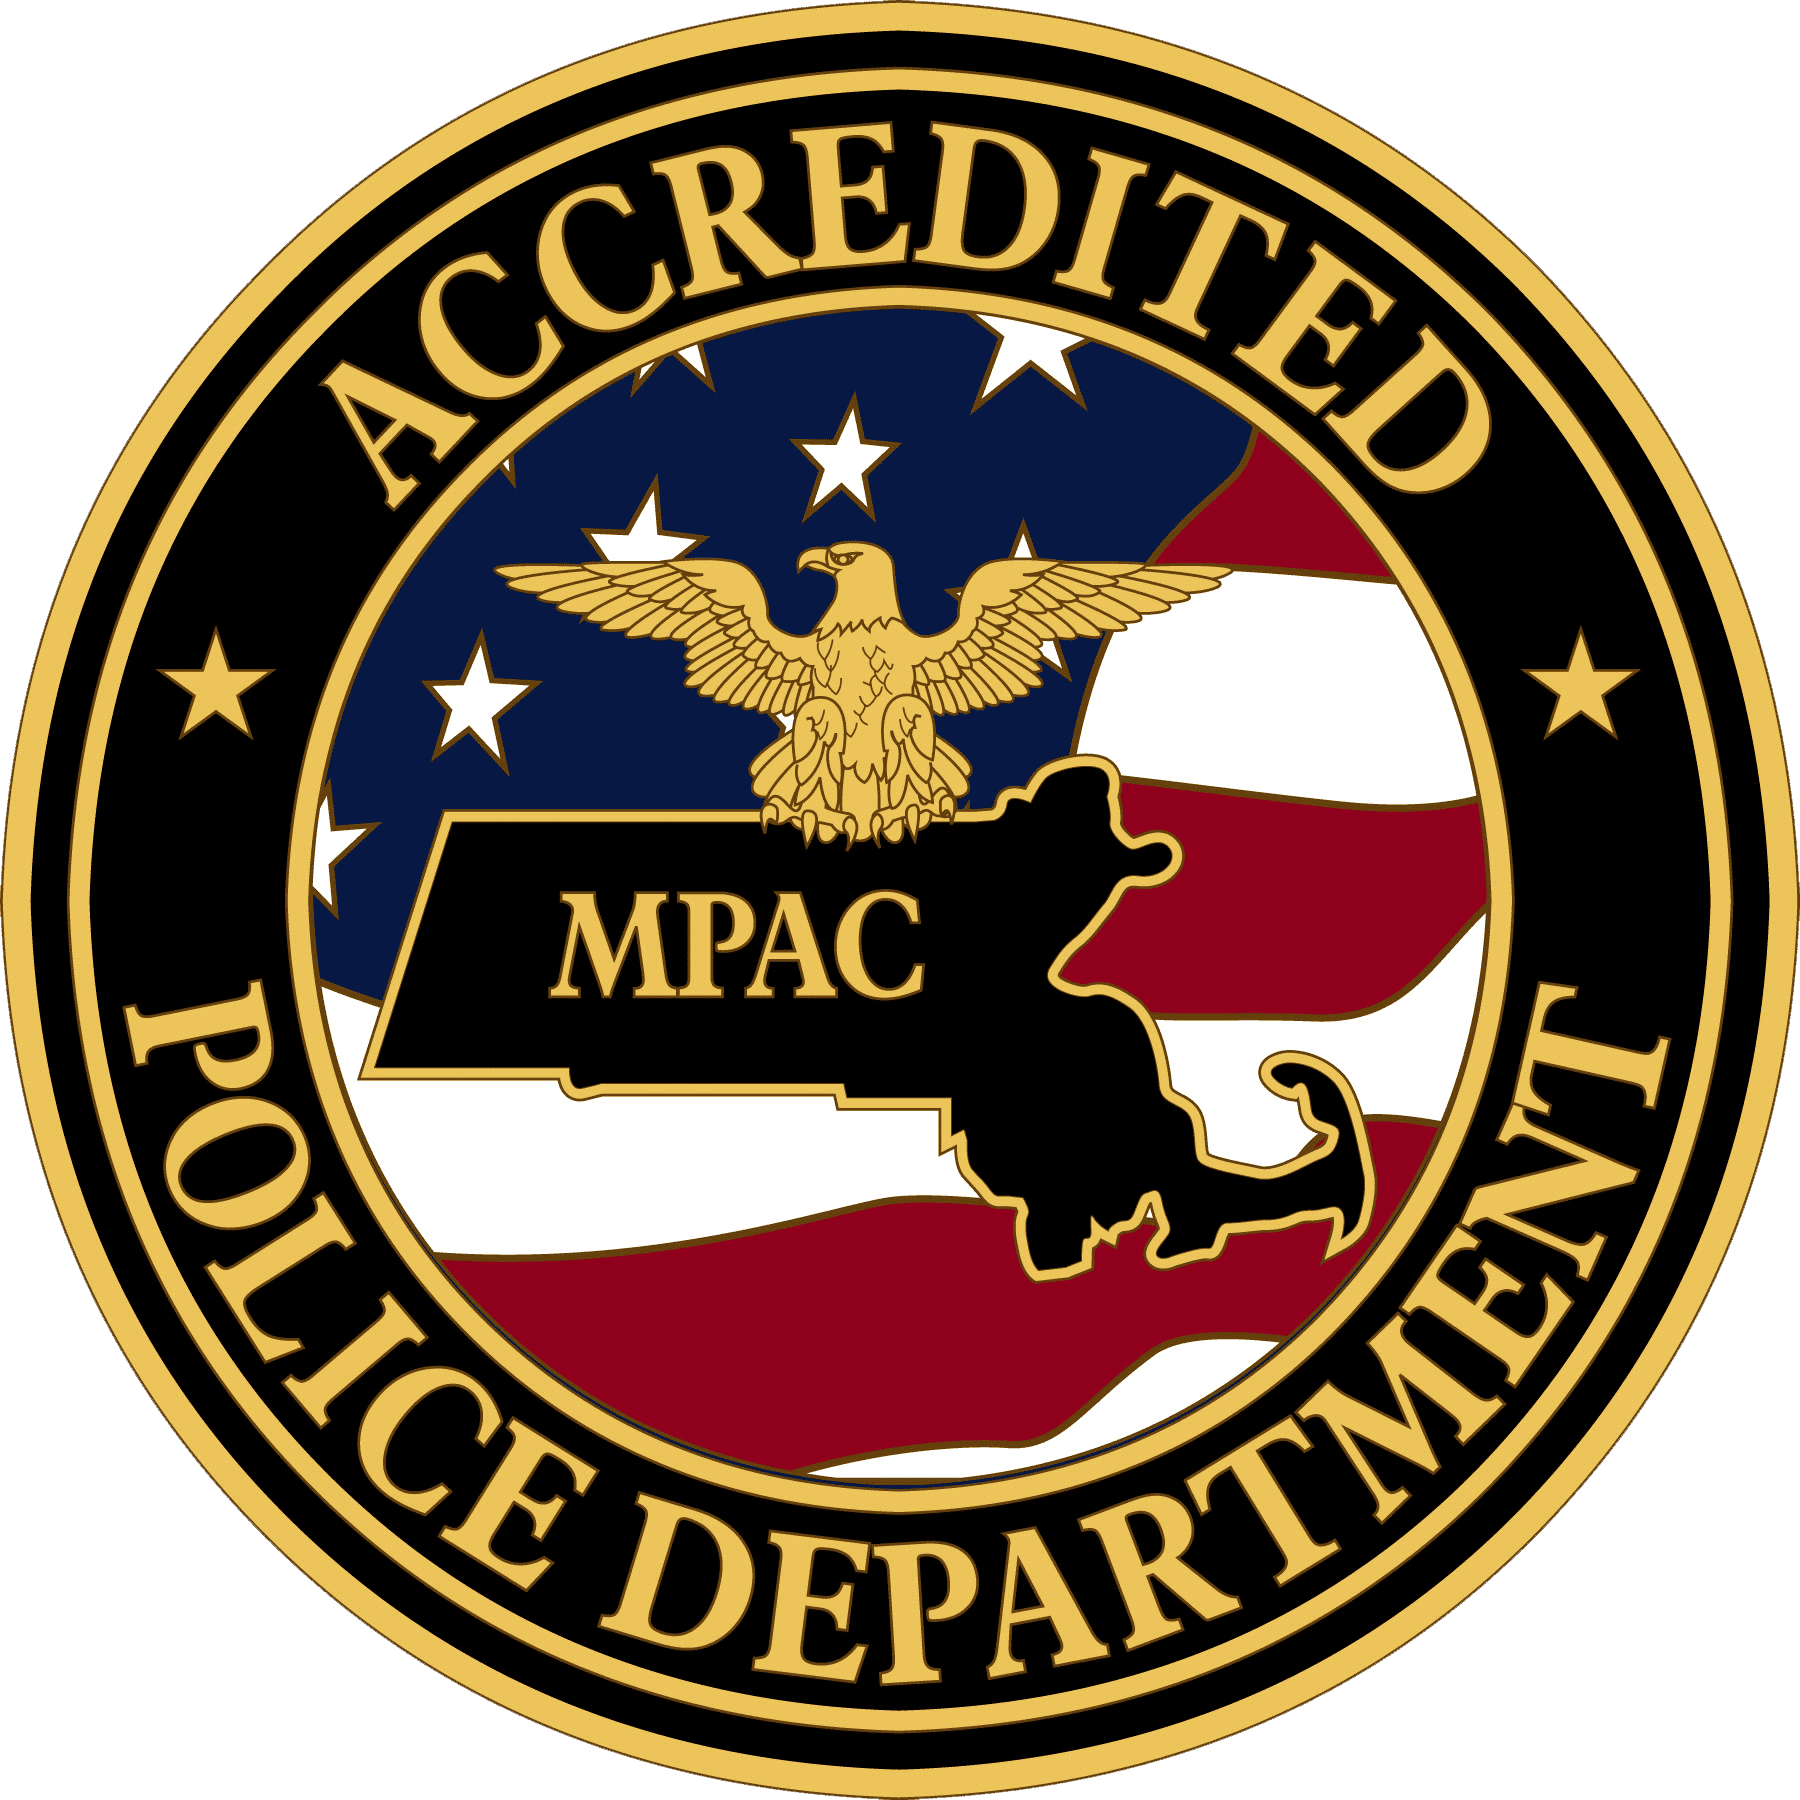 MPAC Accredited Police Department badge